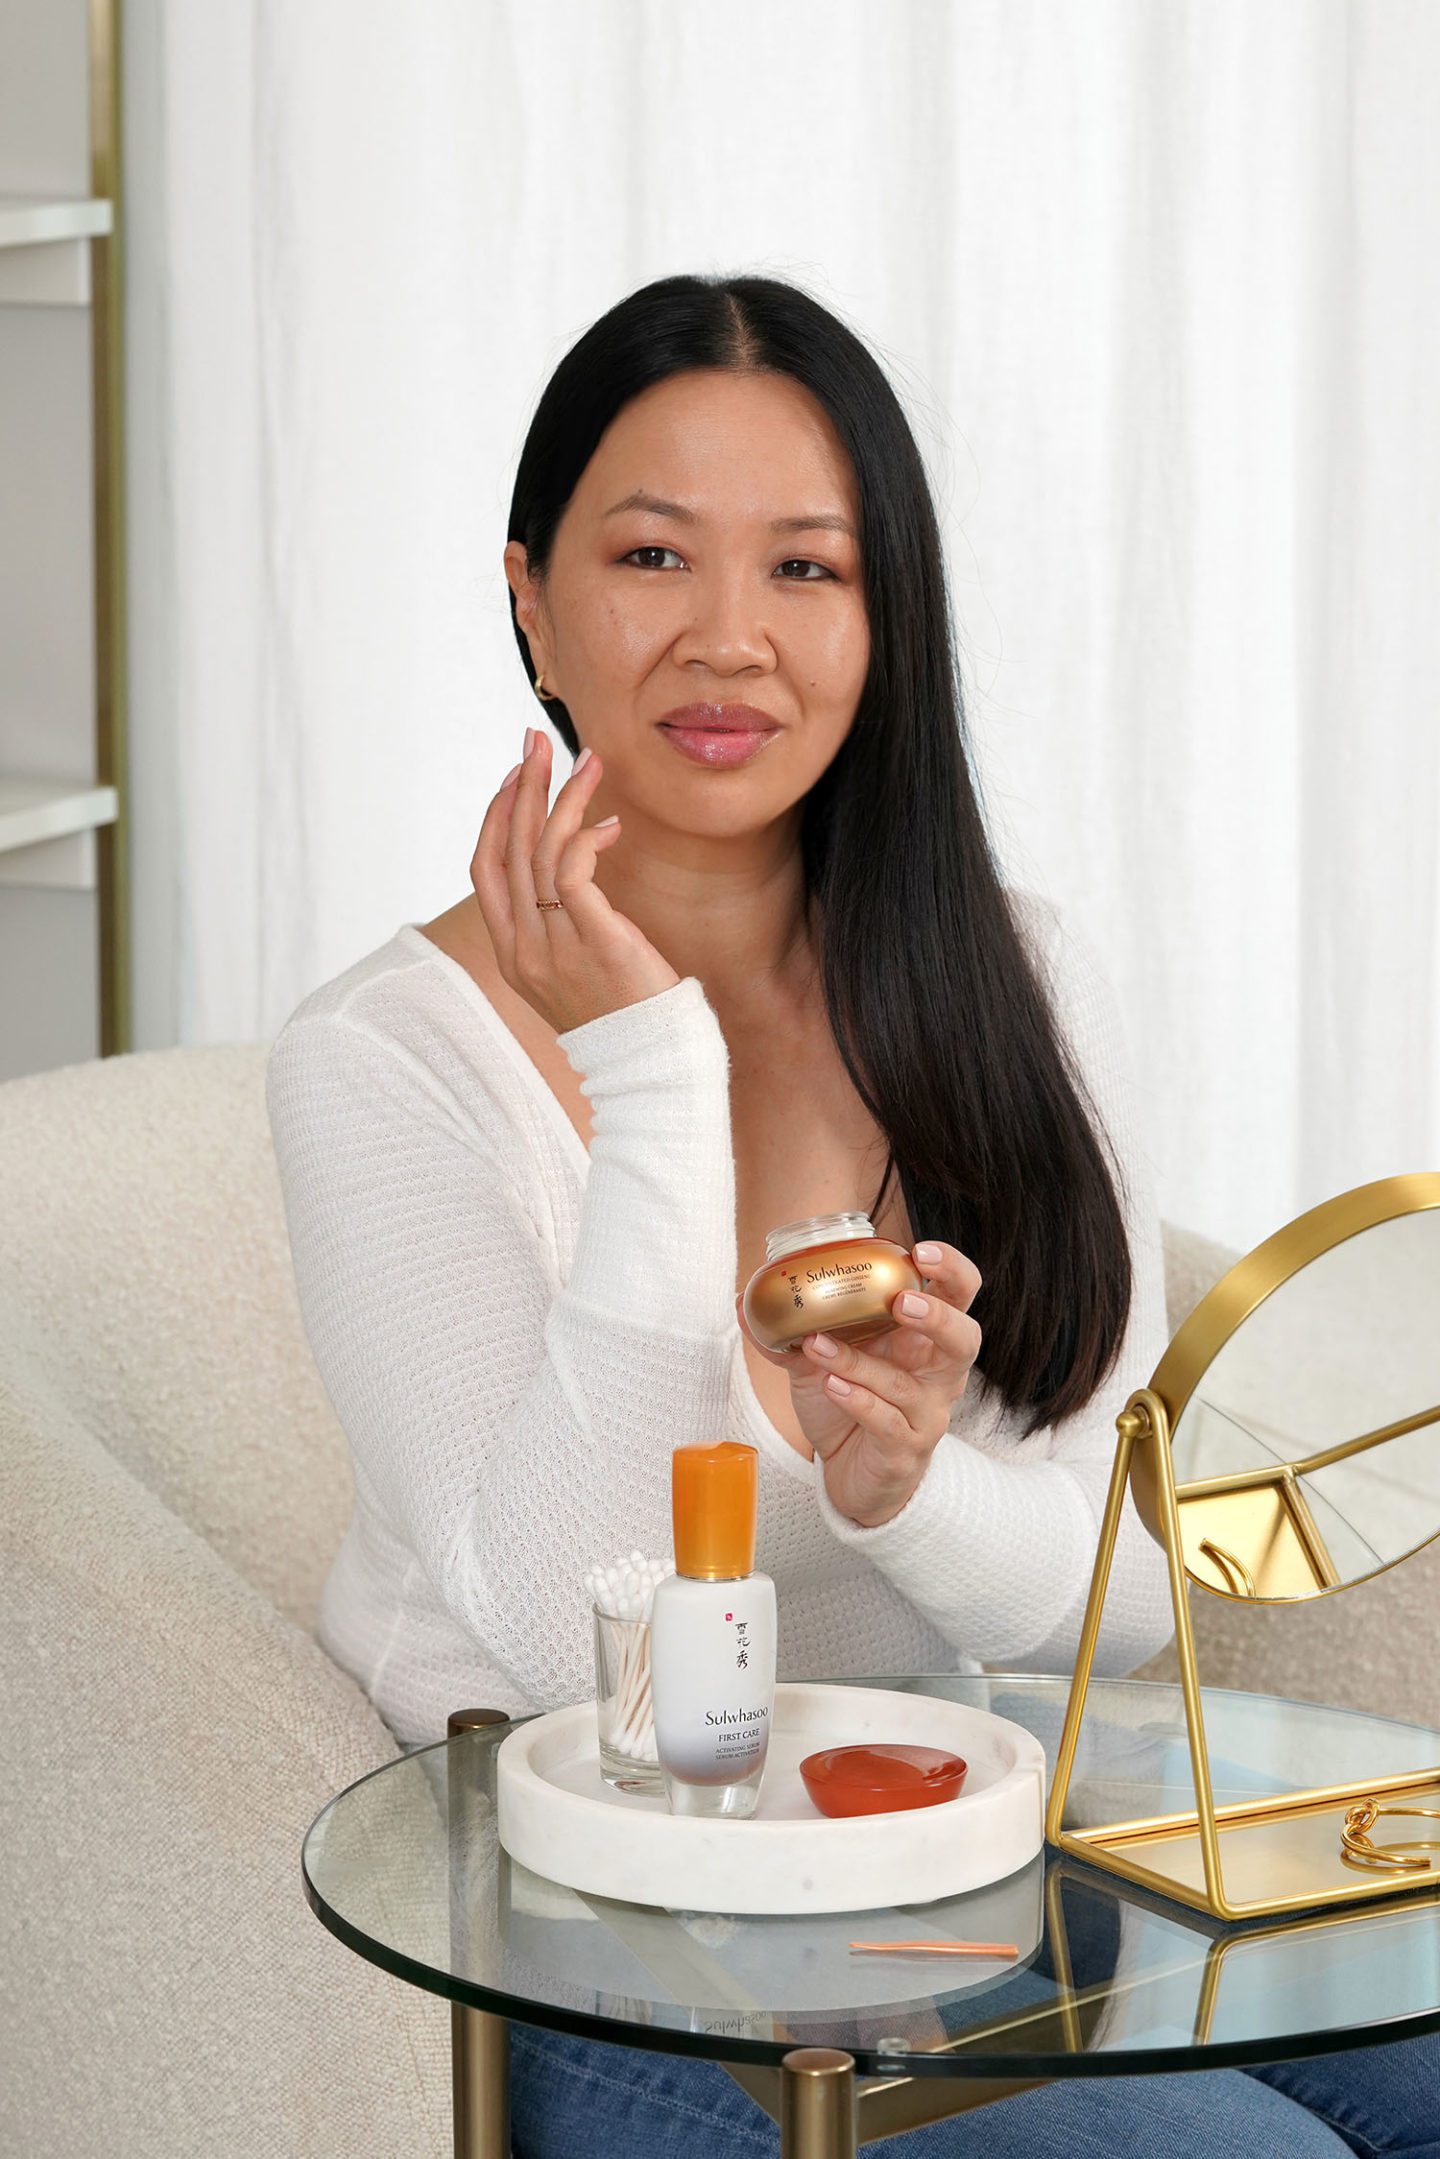 Sulwhasoo First Care Activating Serum and Concentrated Ginseng Renewing Cream